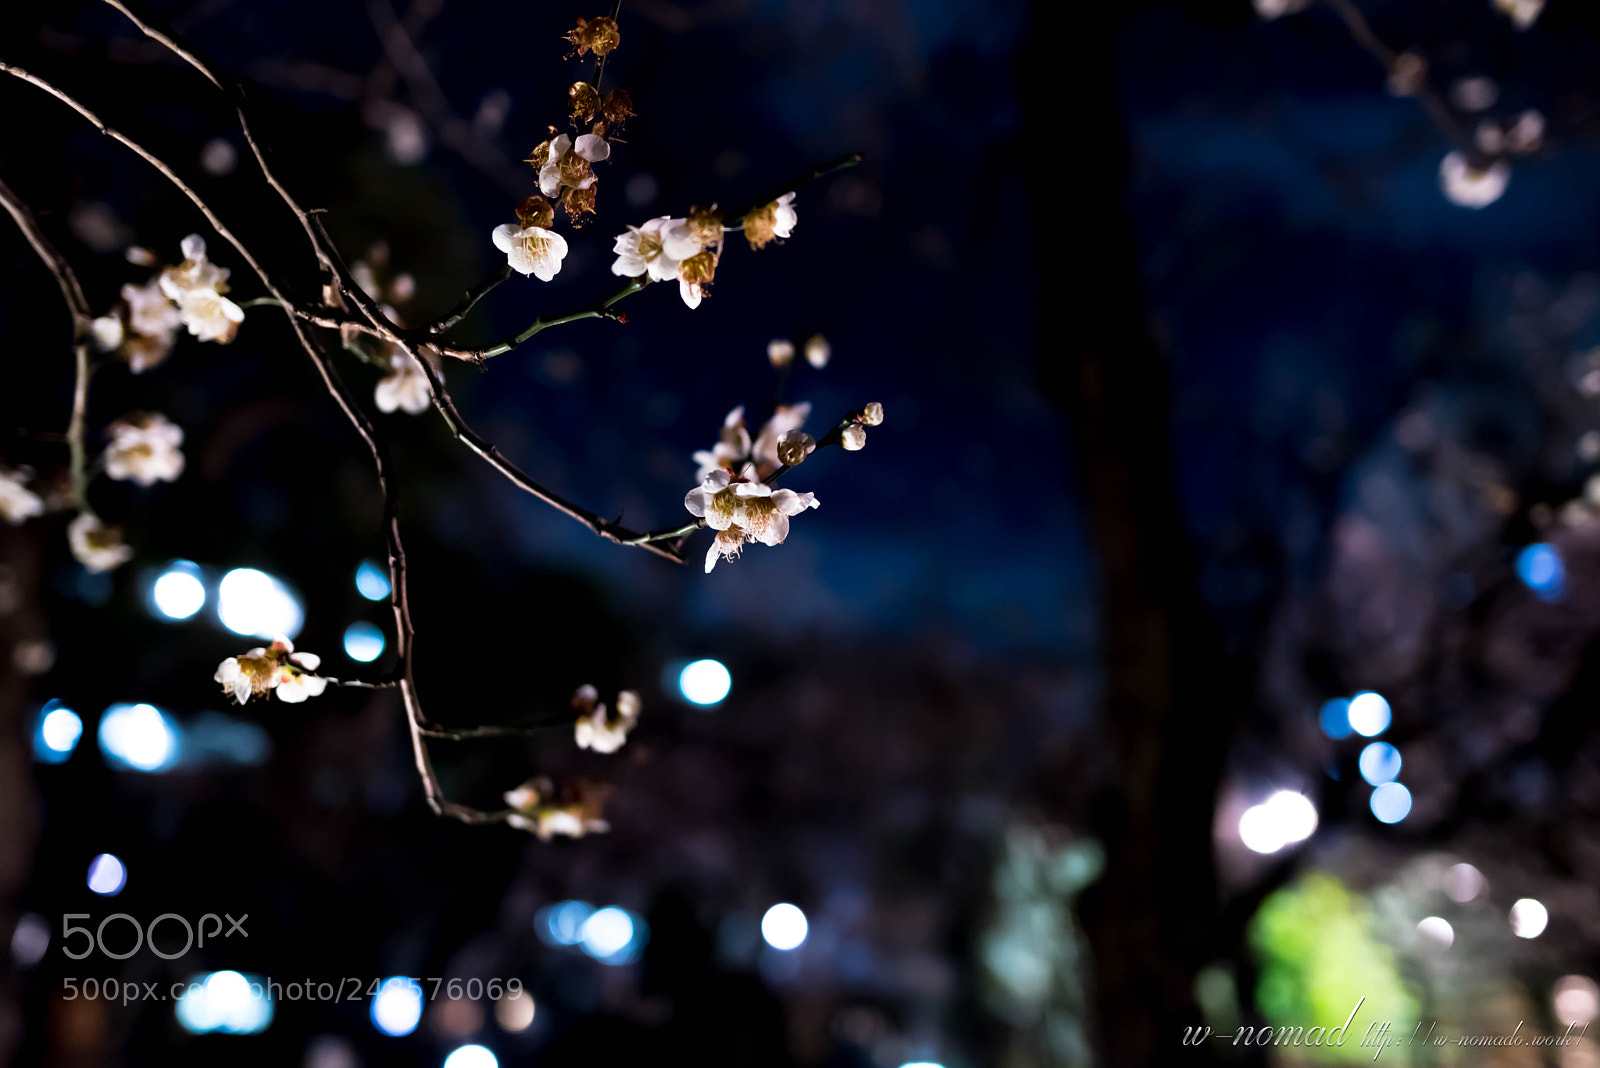 Nikon D750 sample photo. Japanese apricot with the photography